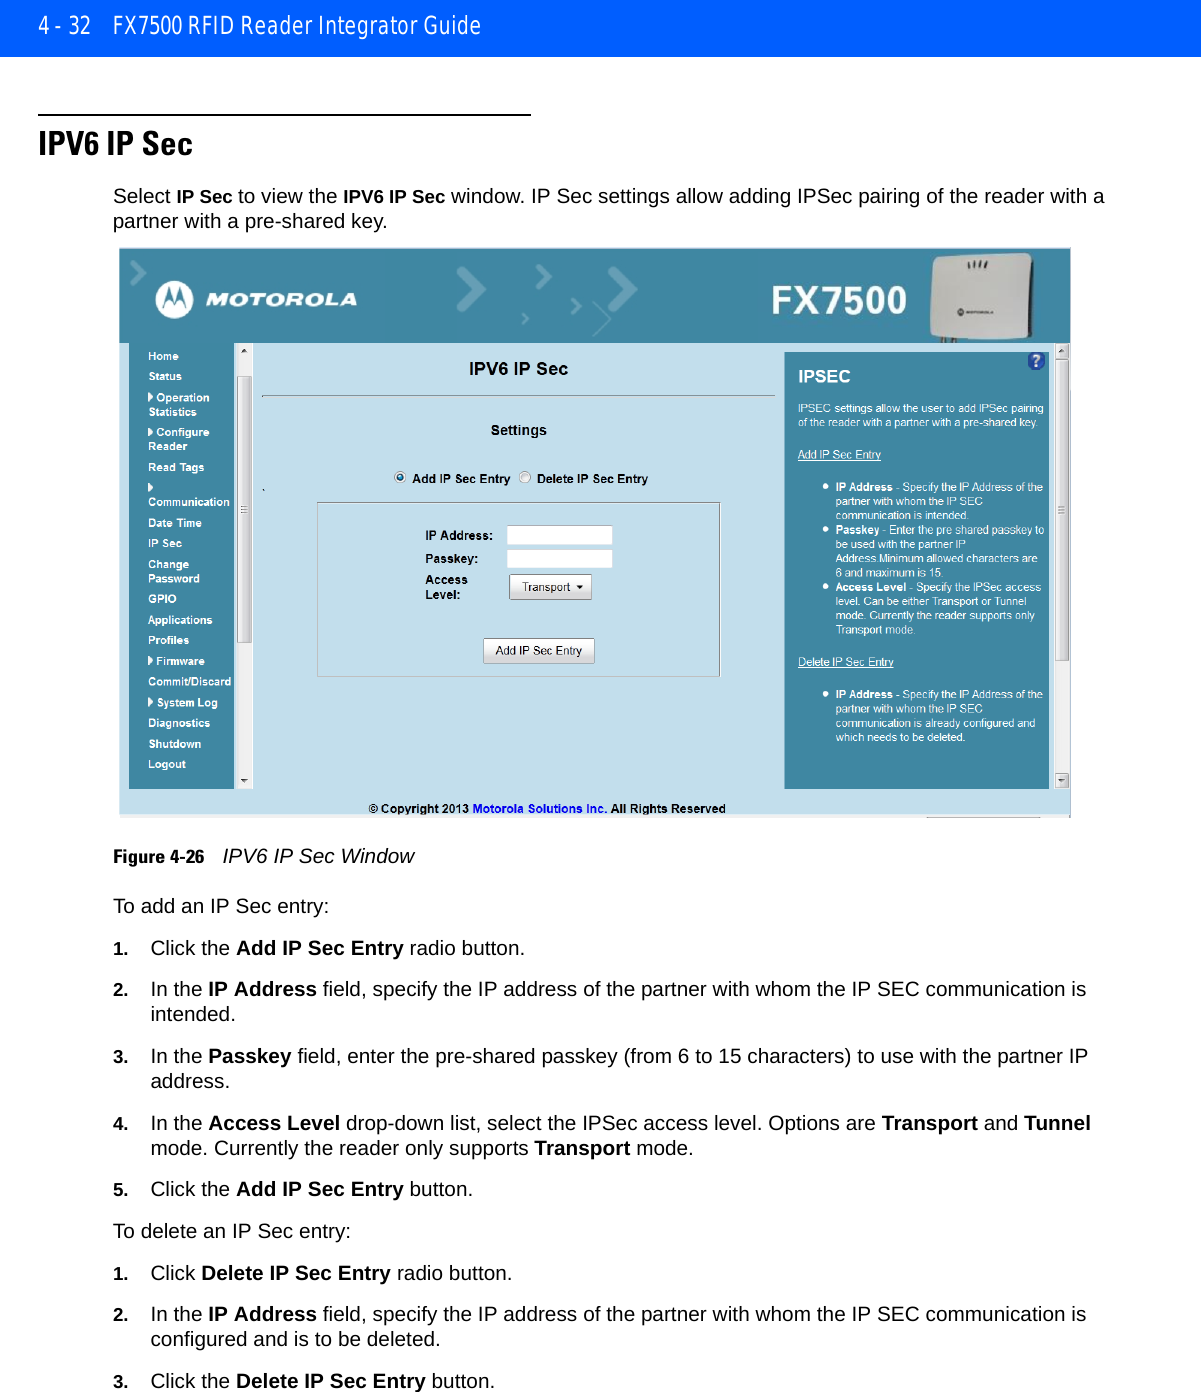 4 - 32 FX7500 RFID Reader Integrator GuideIPV6 IP SecSelect IP Sec to view the IPV6 IP Sec window. IP Sec settings allow adding IPSec pairing of the reader with a partner with a pre-shared key.Figure 4-26    IPV6 IP Sec WindowTo add an IP Sec entry:1. Click the Add IP Sec Entry radio button.2. In the IP Address field, specify the IP address of the partner with whom the IP SEC communication is intended.3. In the Passkey field, enter the pre-shared passkey (from 6 to 15 characters) to use with the partner IP address. 4. In the Access Level drop-down list, select the IPSec access level. Options are Transport and Tunnel mode. Currently the reader only supports Transport mode.5. Click the Add IP Sec Entry button.To delete an IP Sec entry:1. Click Delete IP Sec Entry radio button.2. In the IP Address field, specify the IP address of the partner with whom the IP SEC communication is configured and is to be deleted.3. Click the Delete IP Sec Entry button.